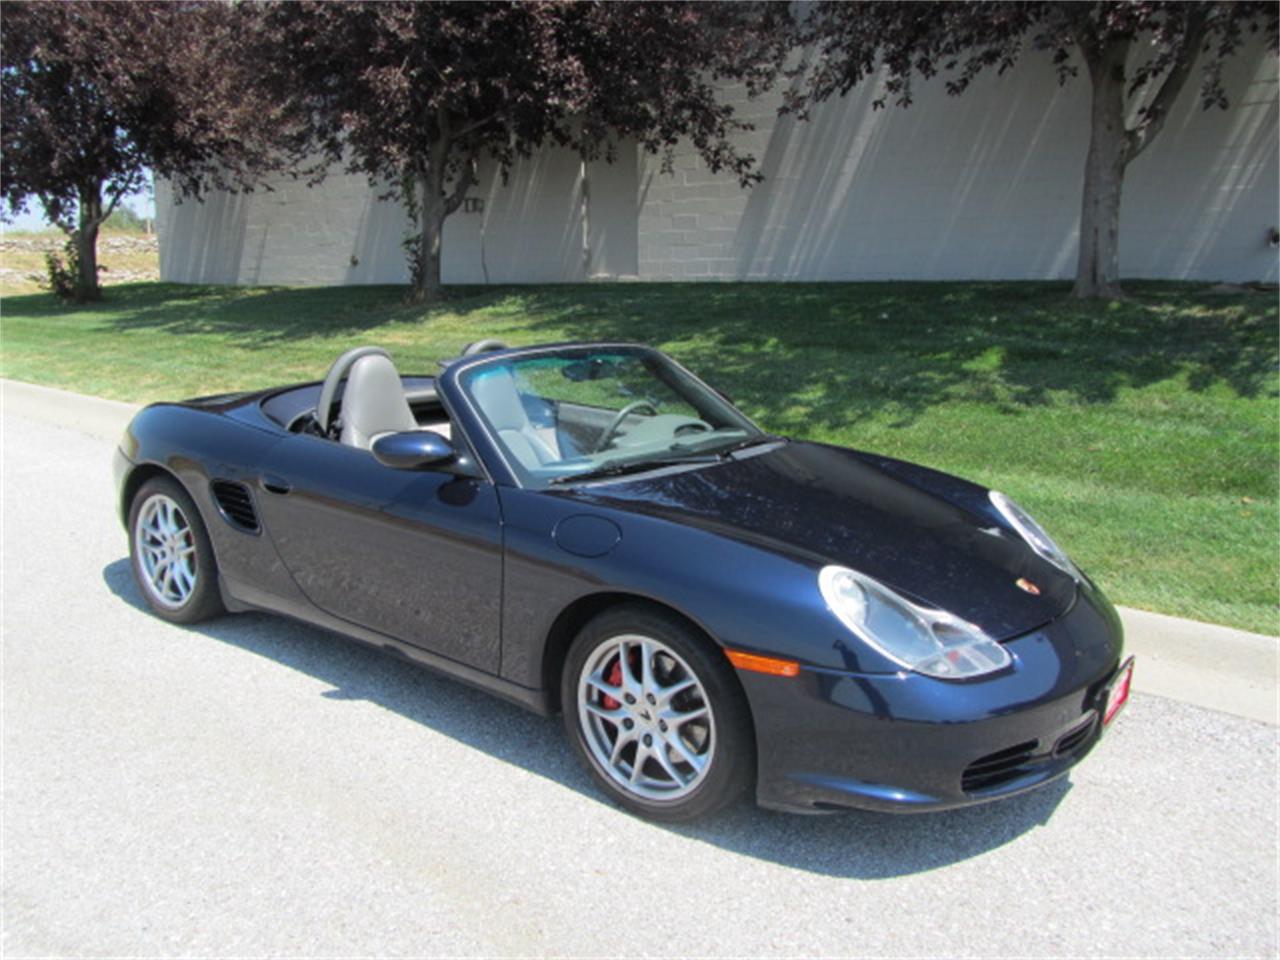 Porsche Boxster (2004) – Specifications & Performance